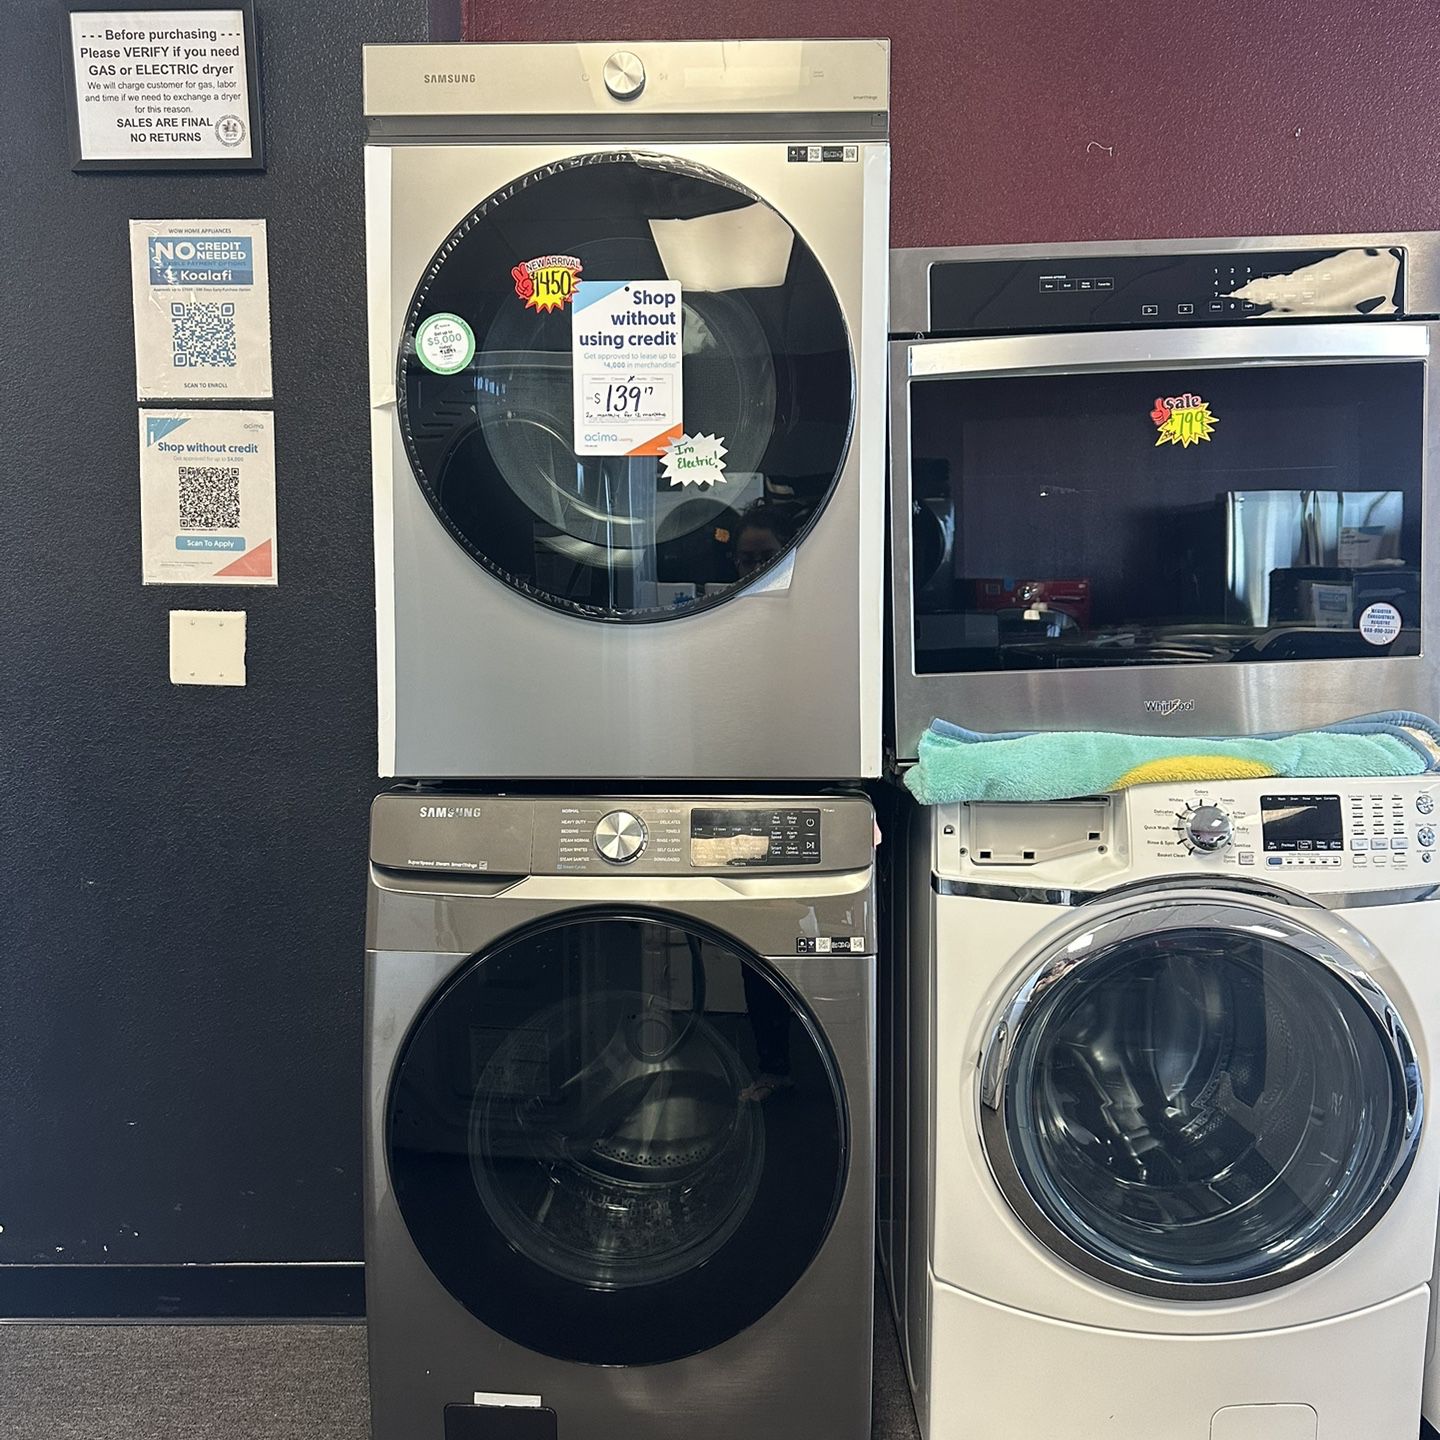 Mew Smart Samsung Washer And Samsung Bespoke Electric Dryer